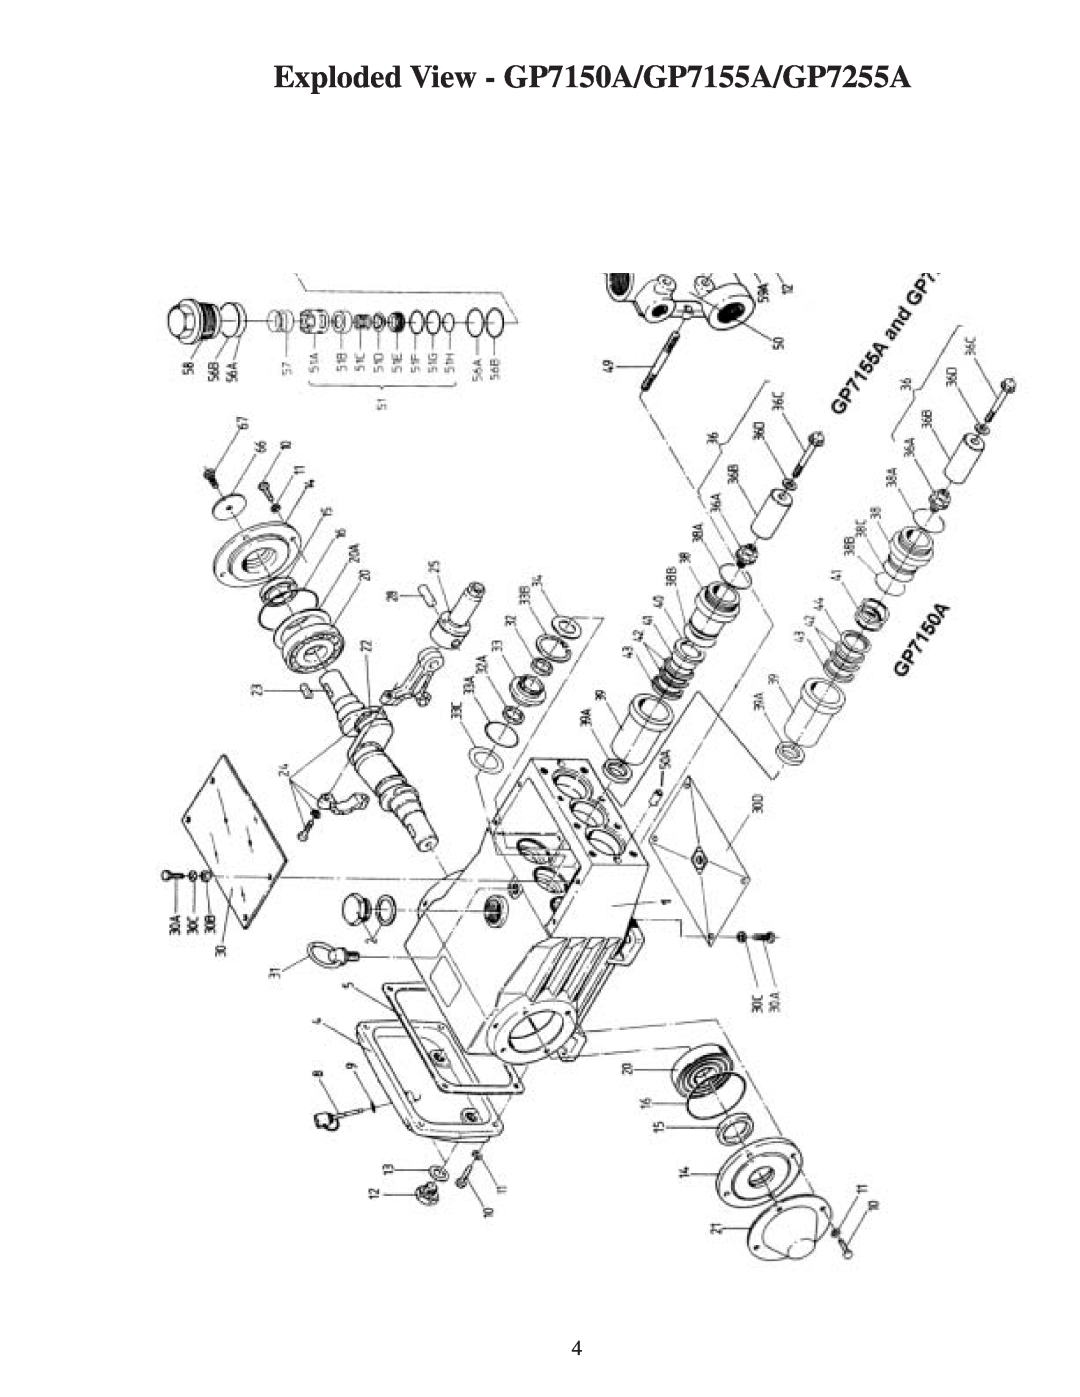 Giant installation instructions Exploded View - GP7150A/GP7155A/GP7255A 